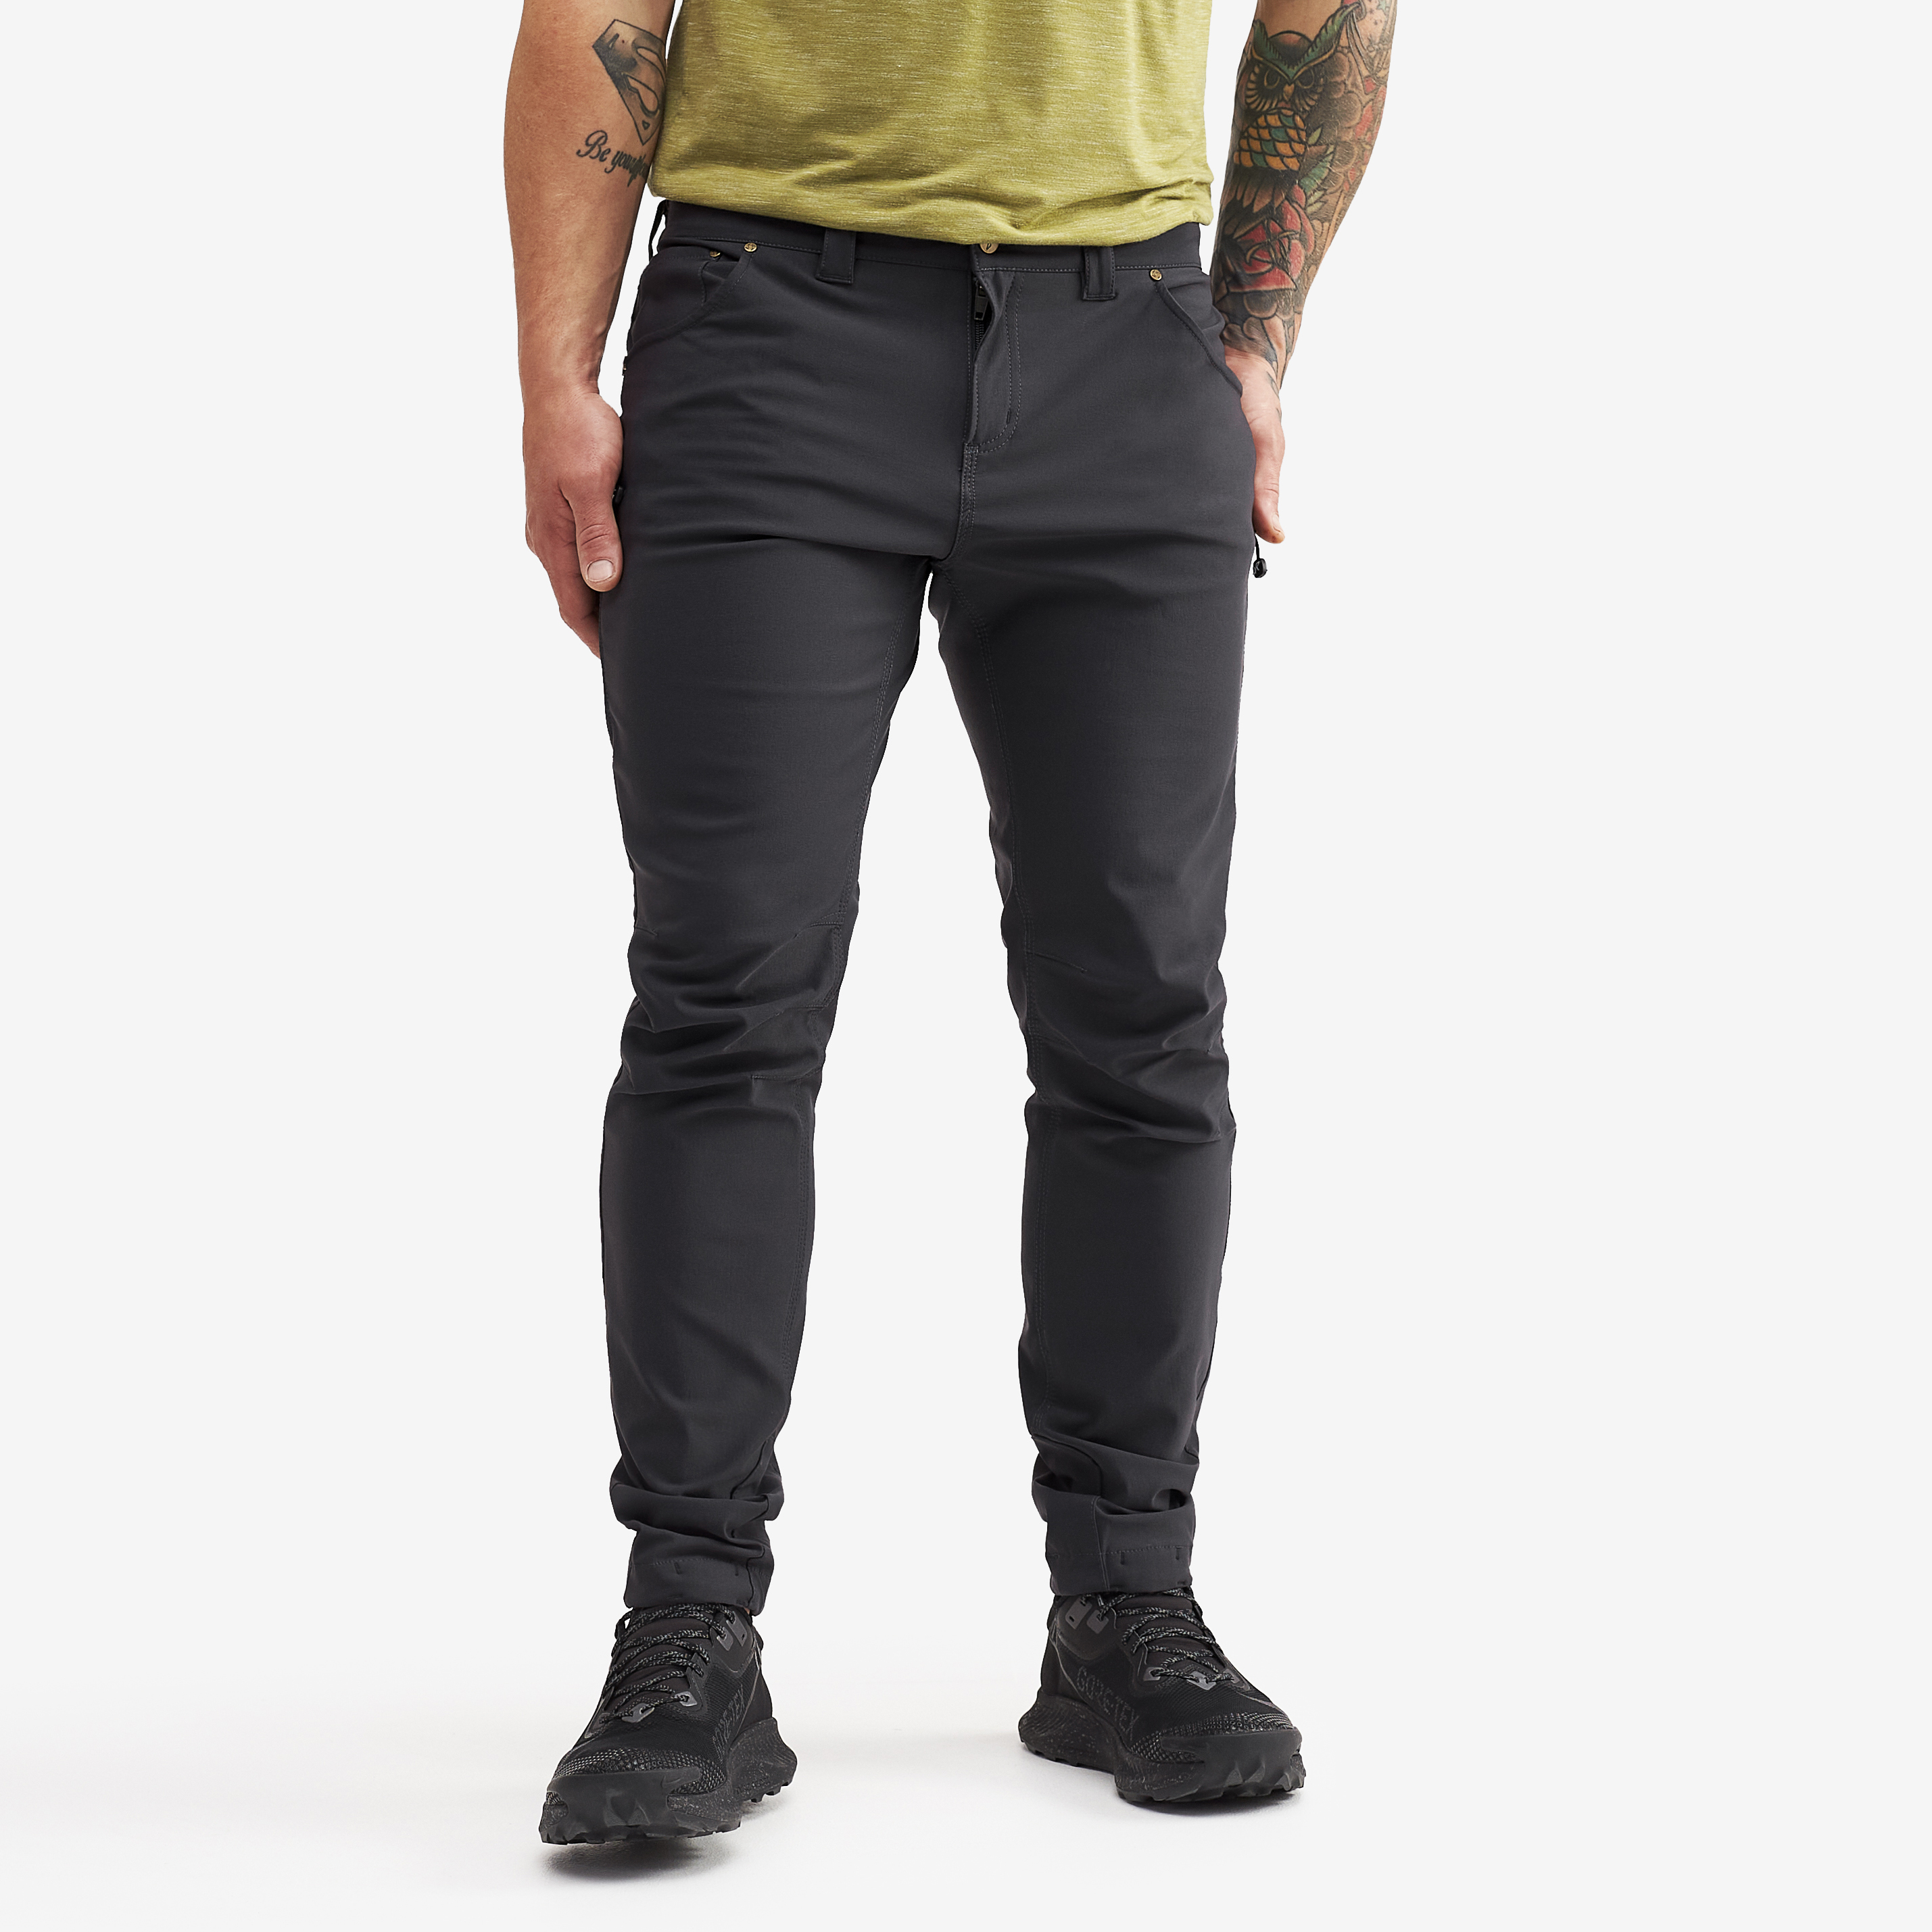 Adrenaline Outdoor Jeans Anthracite Hombres